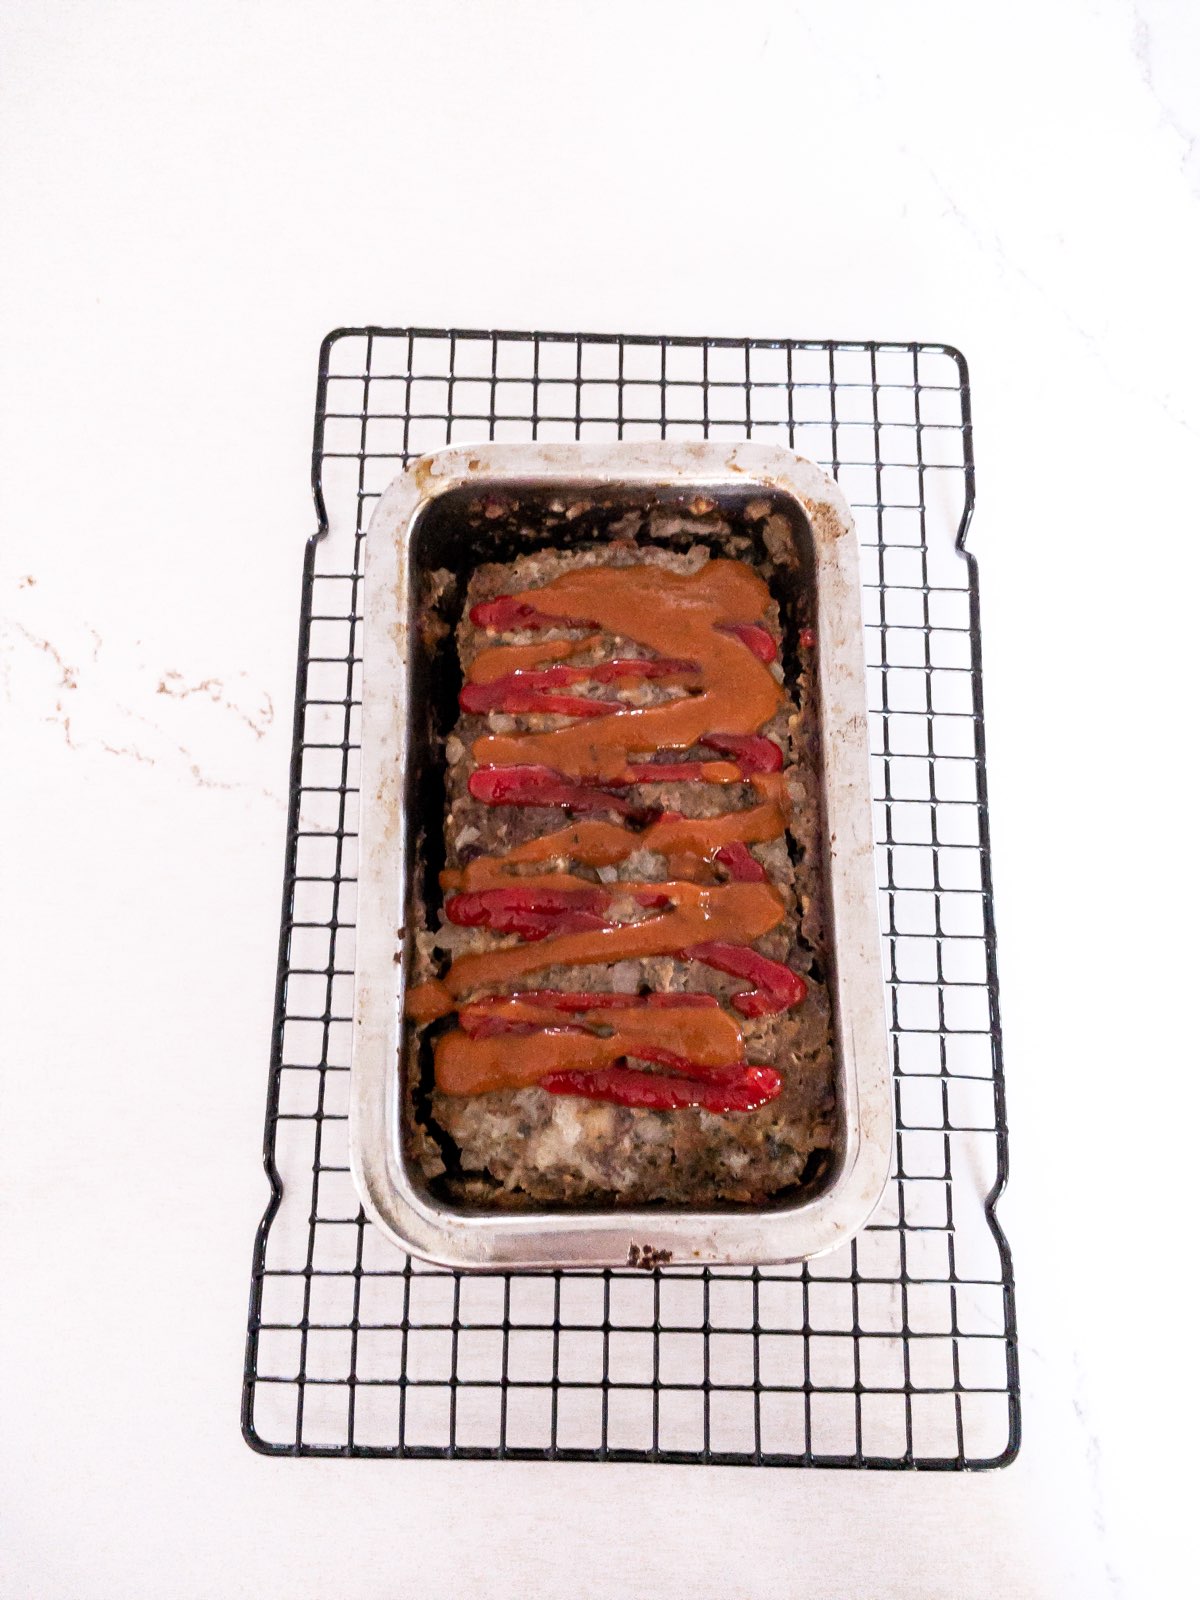 The best, homemade, healthy meatloaf that the family will absolutely love!